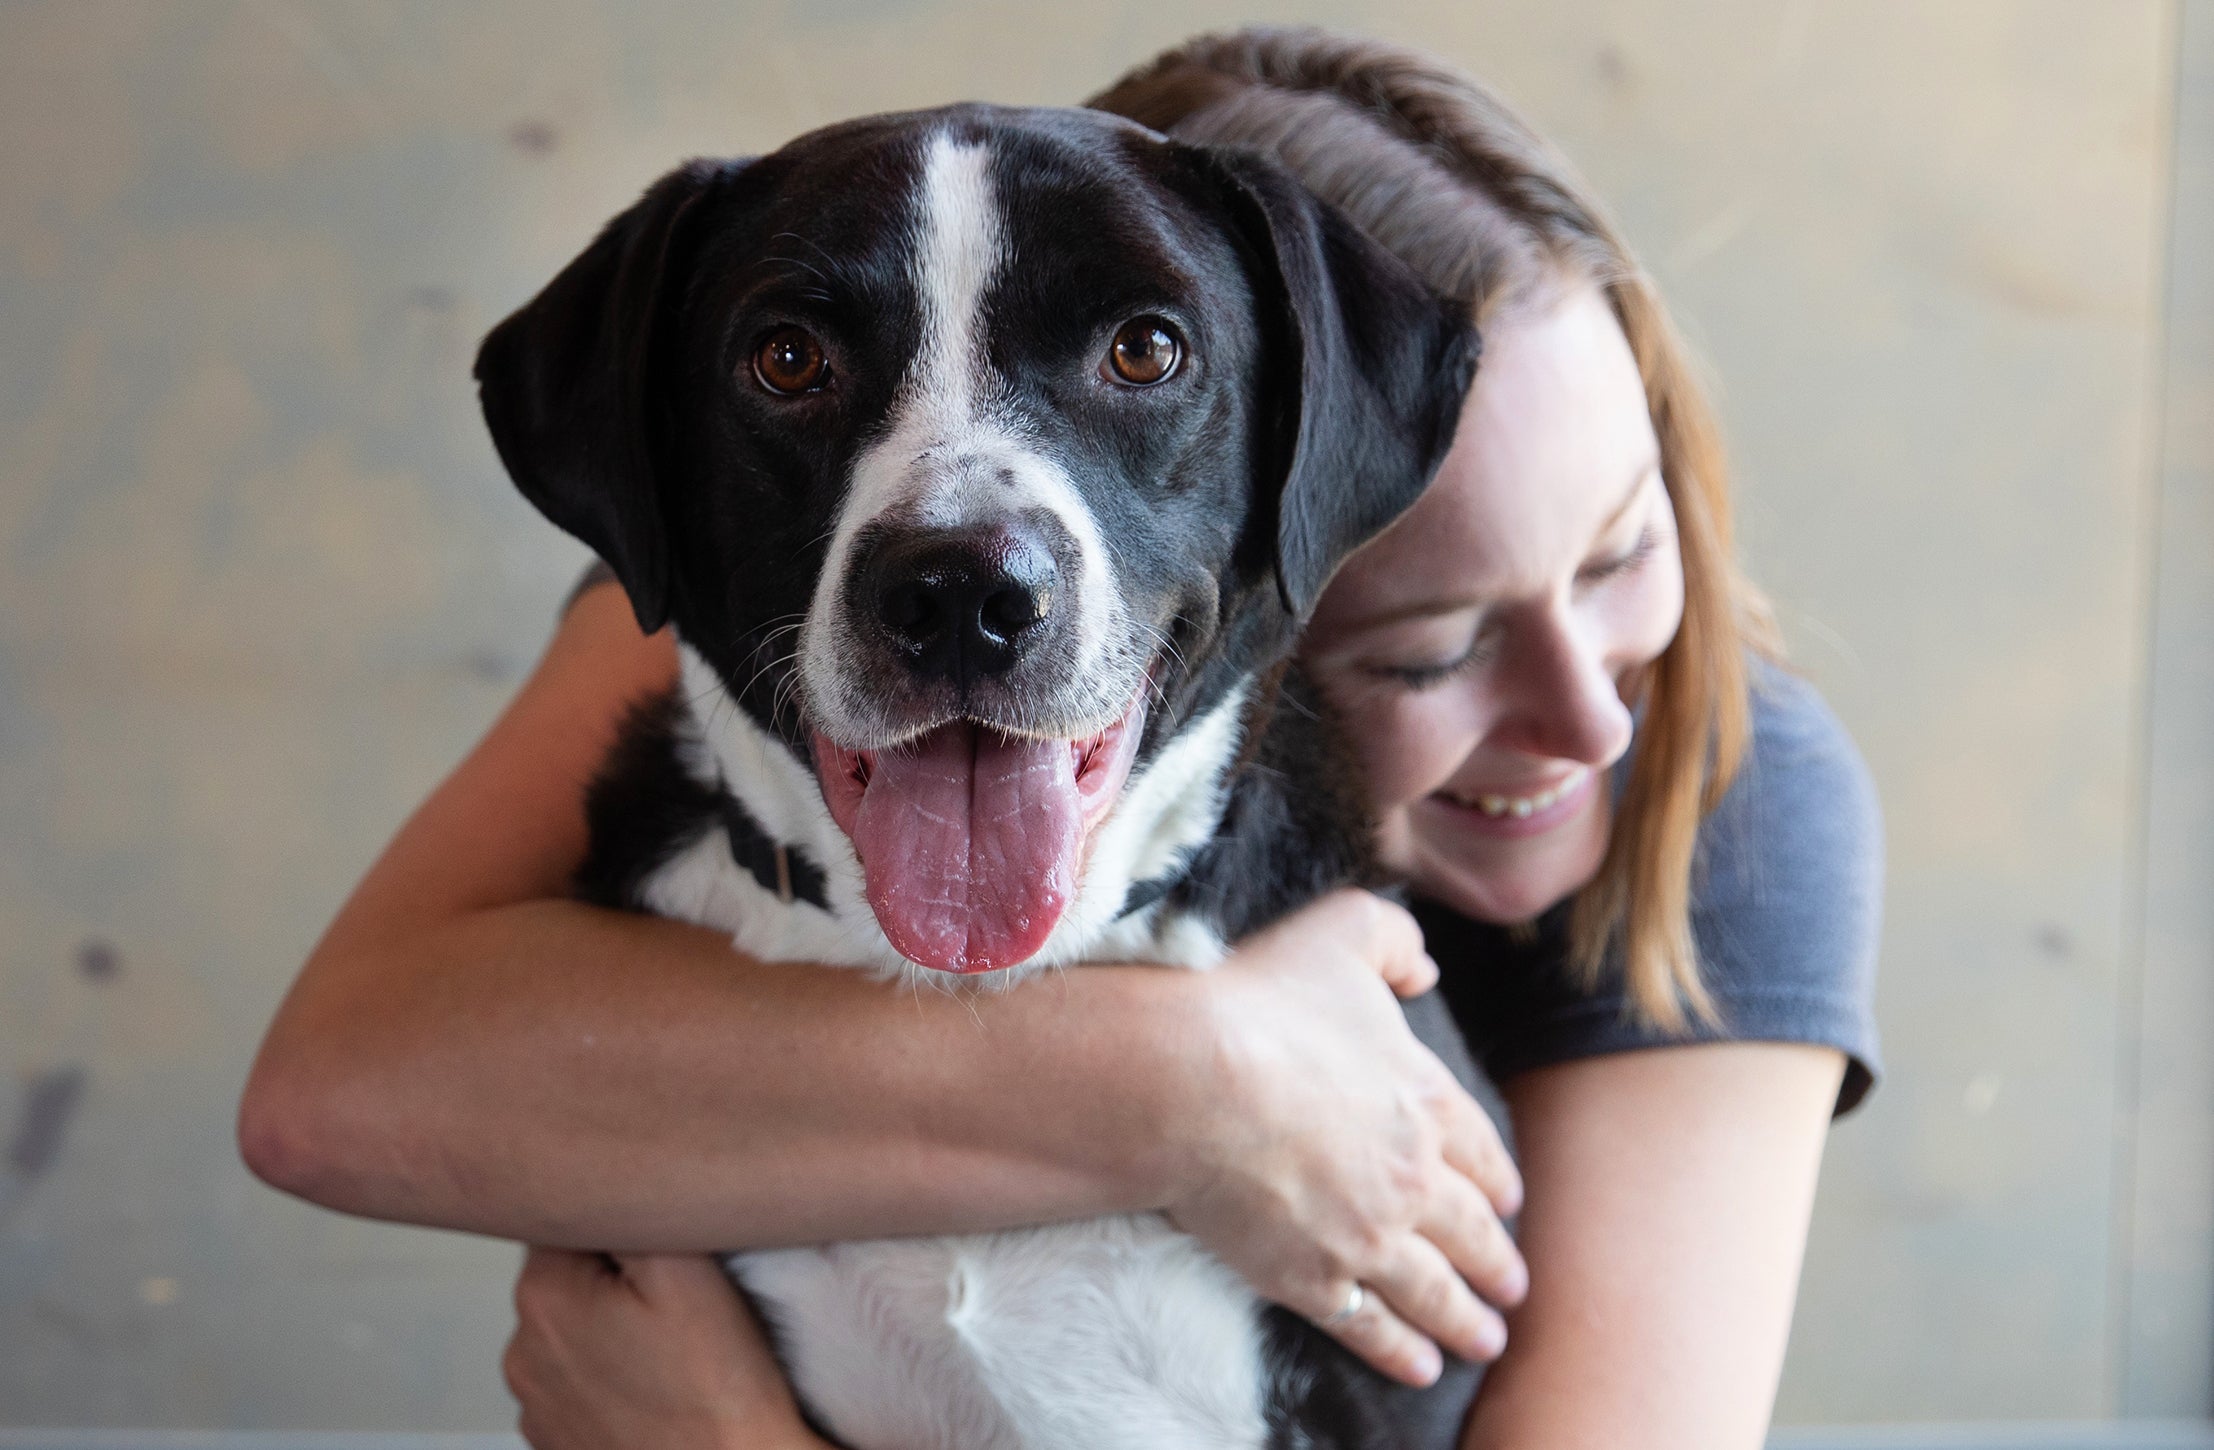 Smiling person hugging a black and white dog